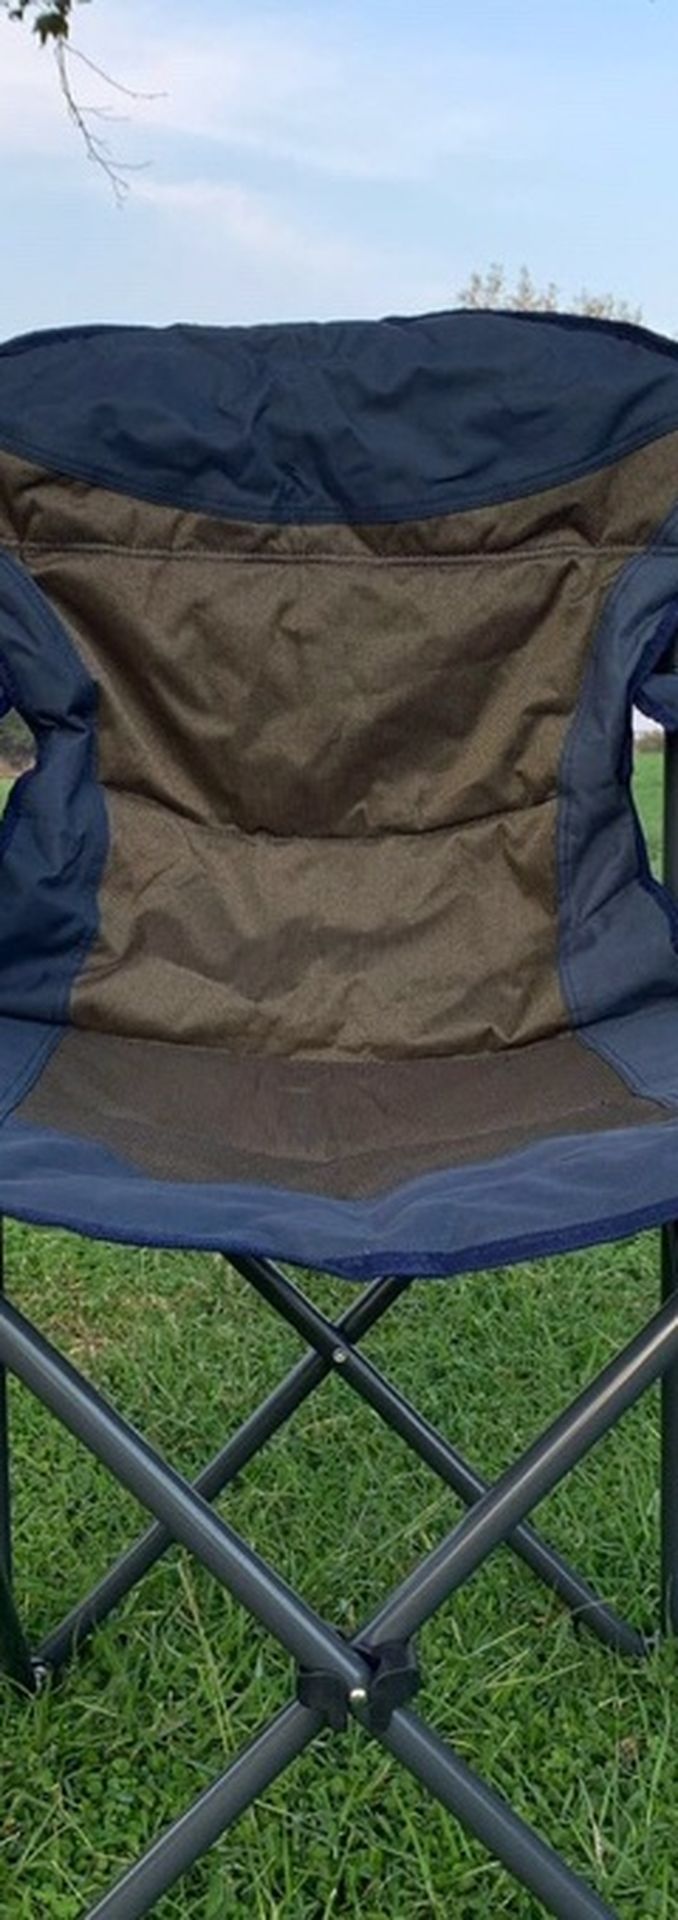 🔥Black Friday Deal 🔥 Brand new!Heavy-Duty Portable Camping Chair, Collapsible Padded Arm Chair with Cup Holders and Lower Mesh Side Pocket🌟